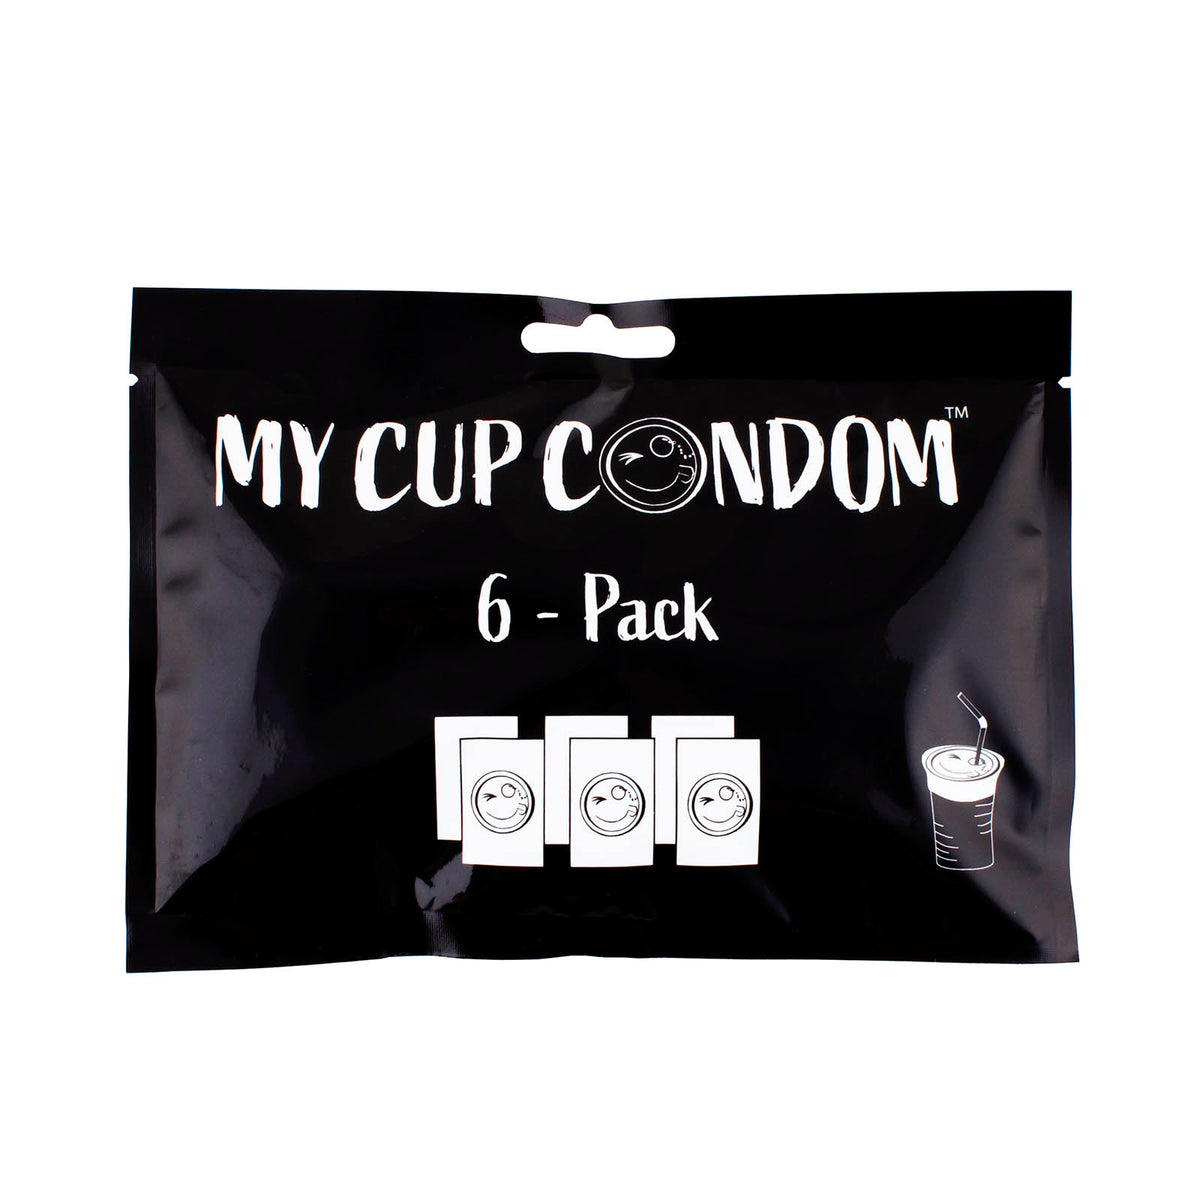 5 Pcs Drink Covers For Alcohol Protection, Reusable Drink Cup Cap With Straw  Hole, Cup Covers Protector For Bar Club Party To Keep Out Unwanted Items